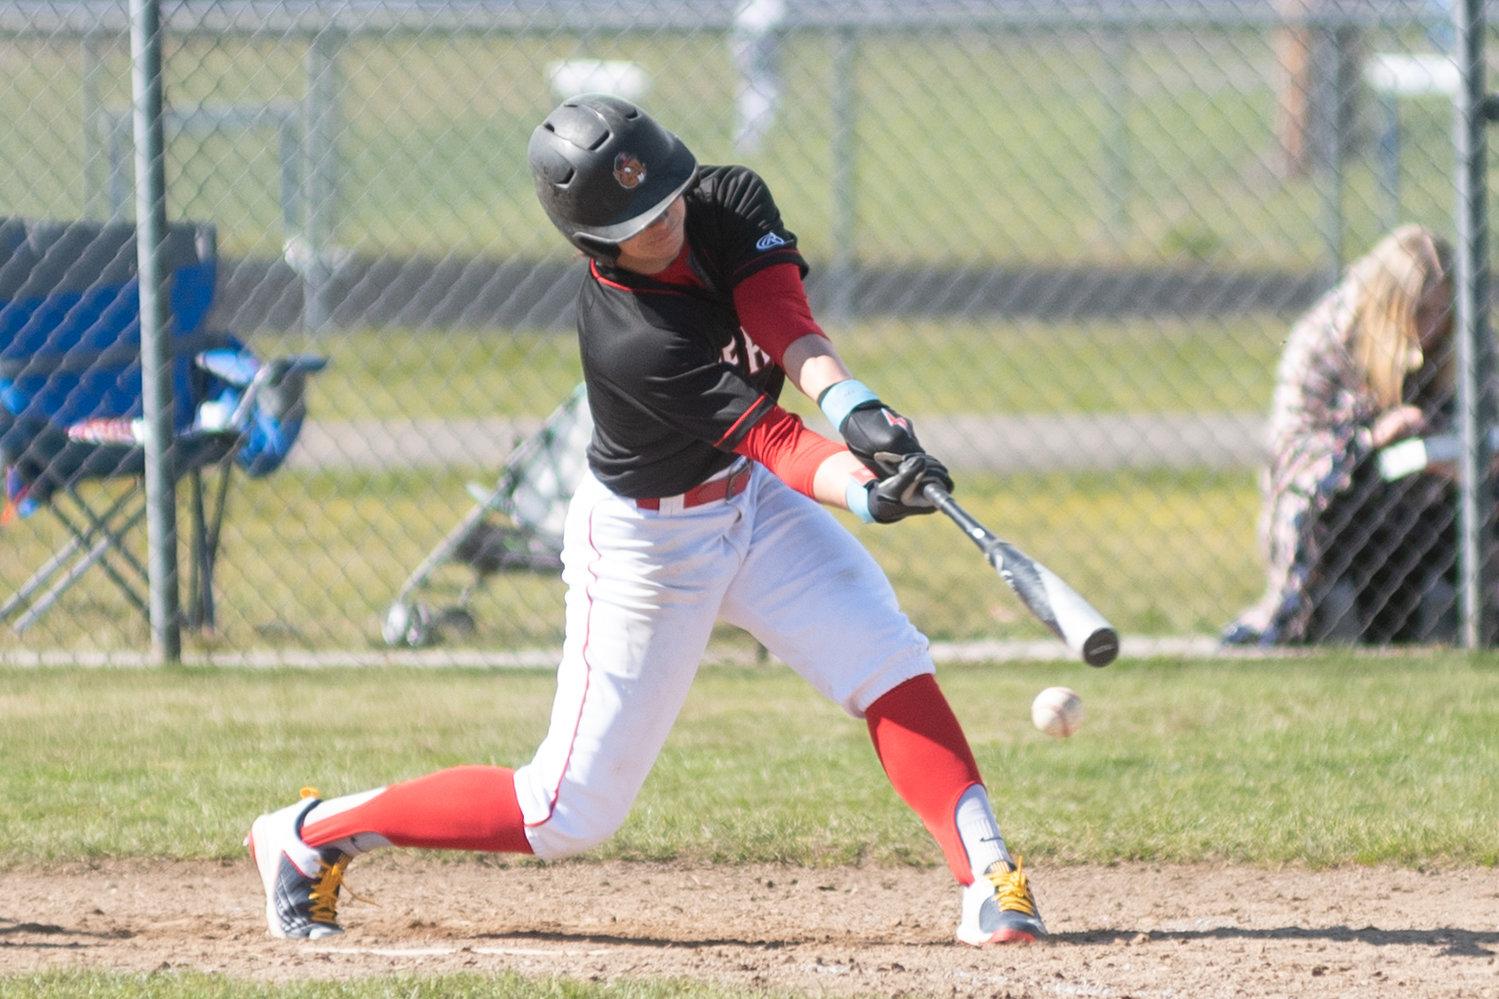 Tenino's Easton Snider takes a swing against Rochester in the Scatter Creek Derby March 12.